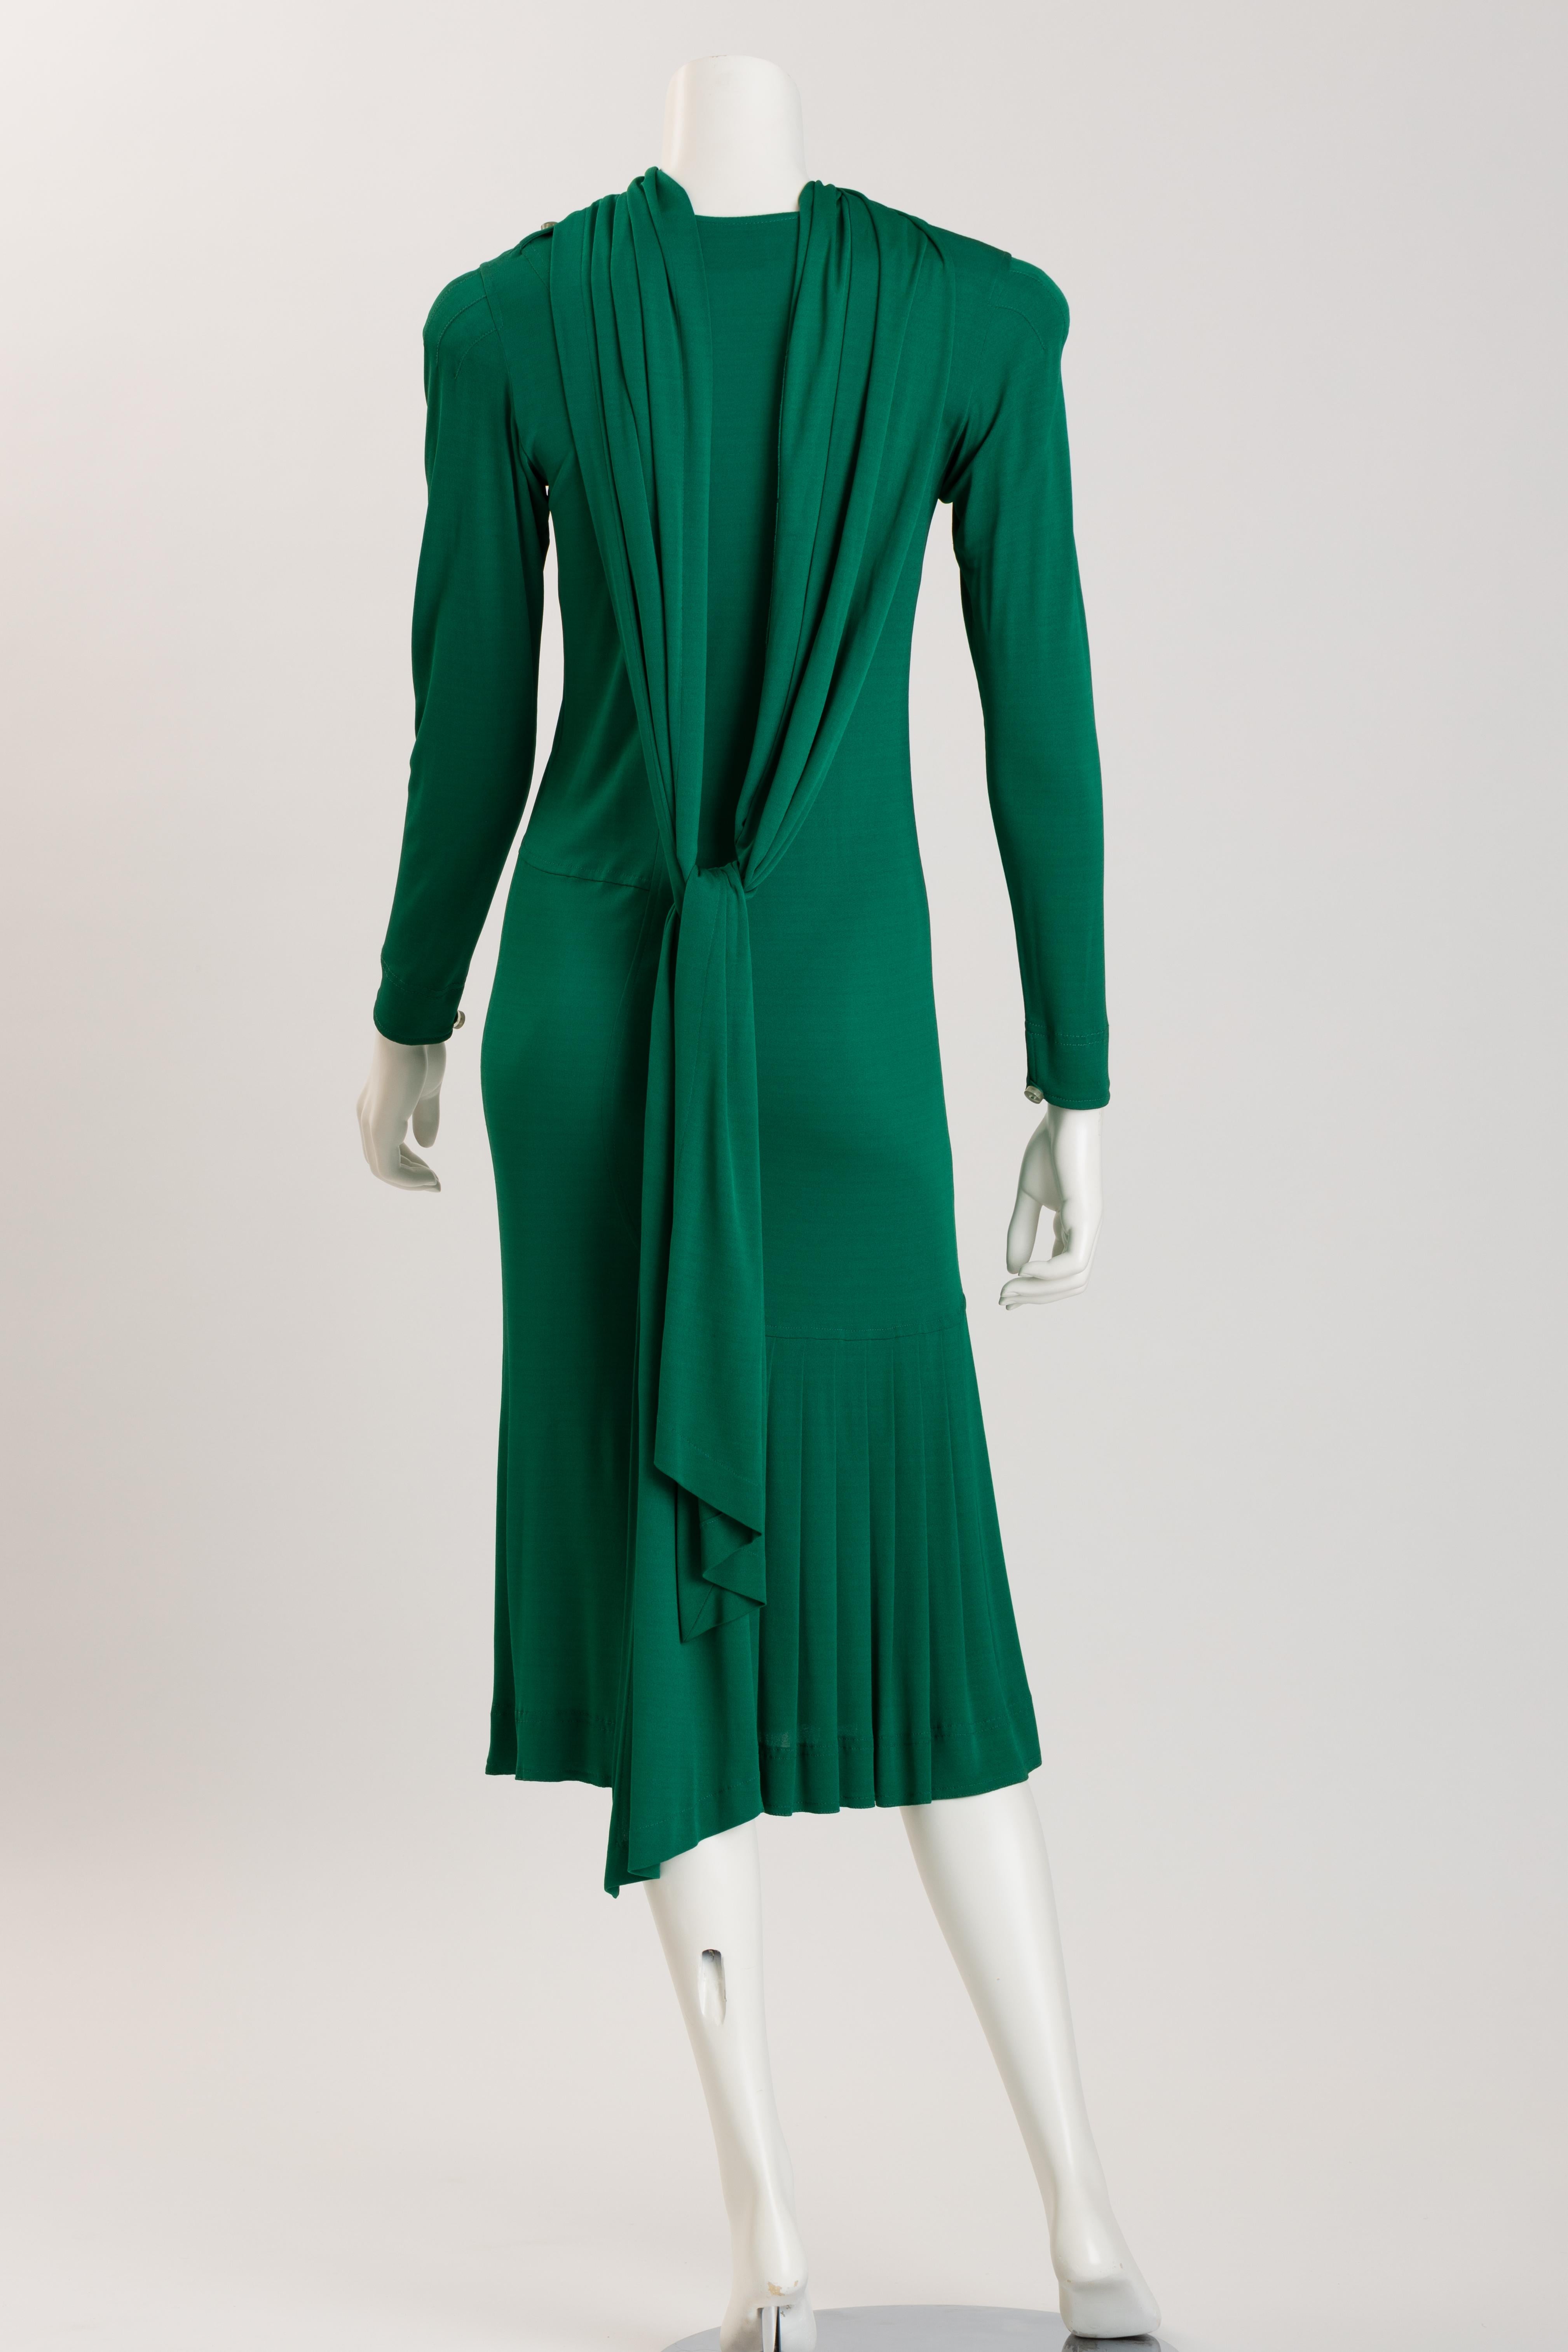 Jean Muir Emerald Green Viscose Jersey Cocktail Dress In Good Condition For Sale In New York, NY